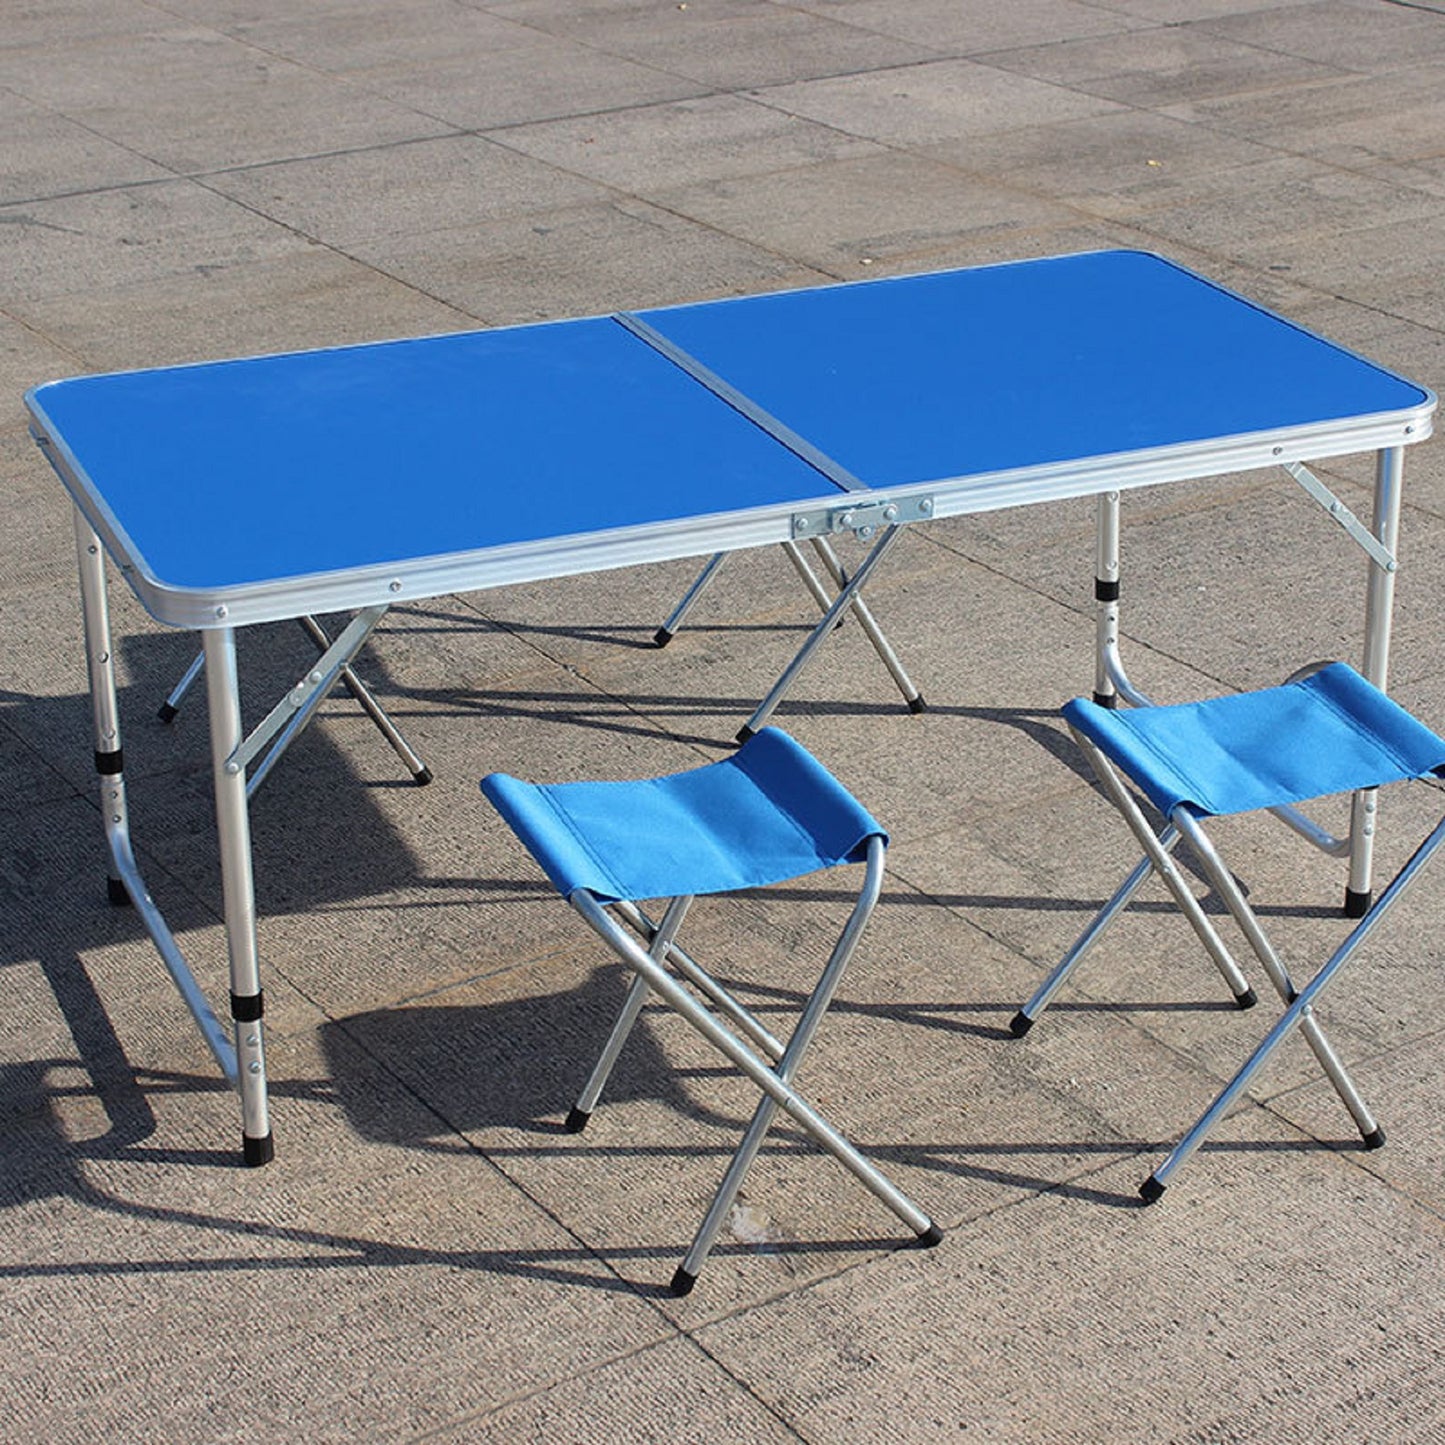 Folding table+4 Aluminum chairs